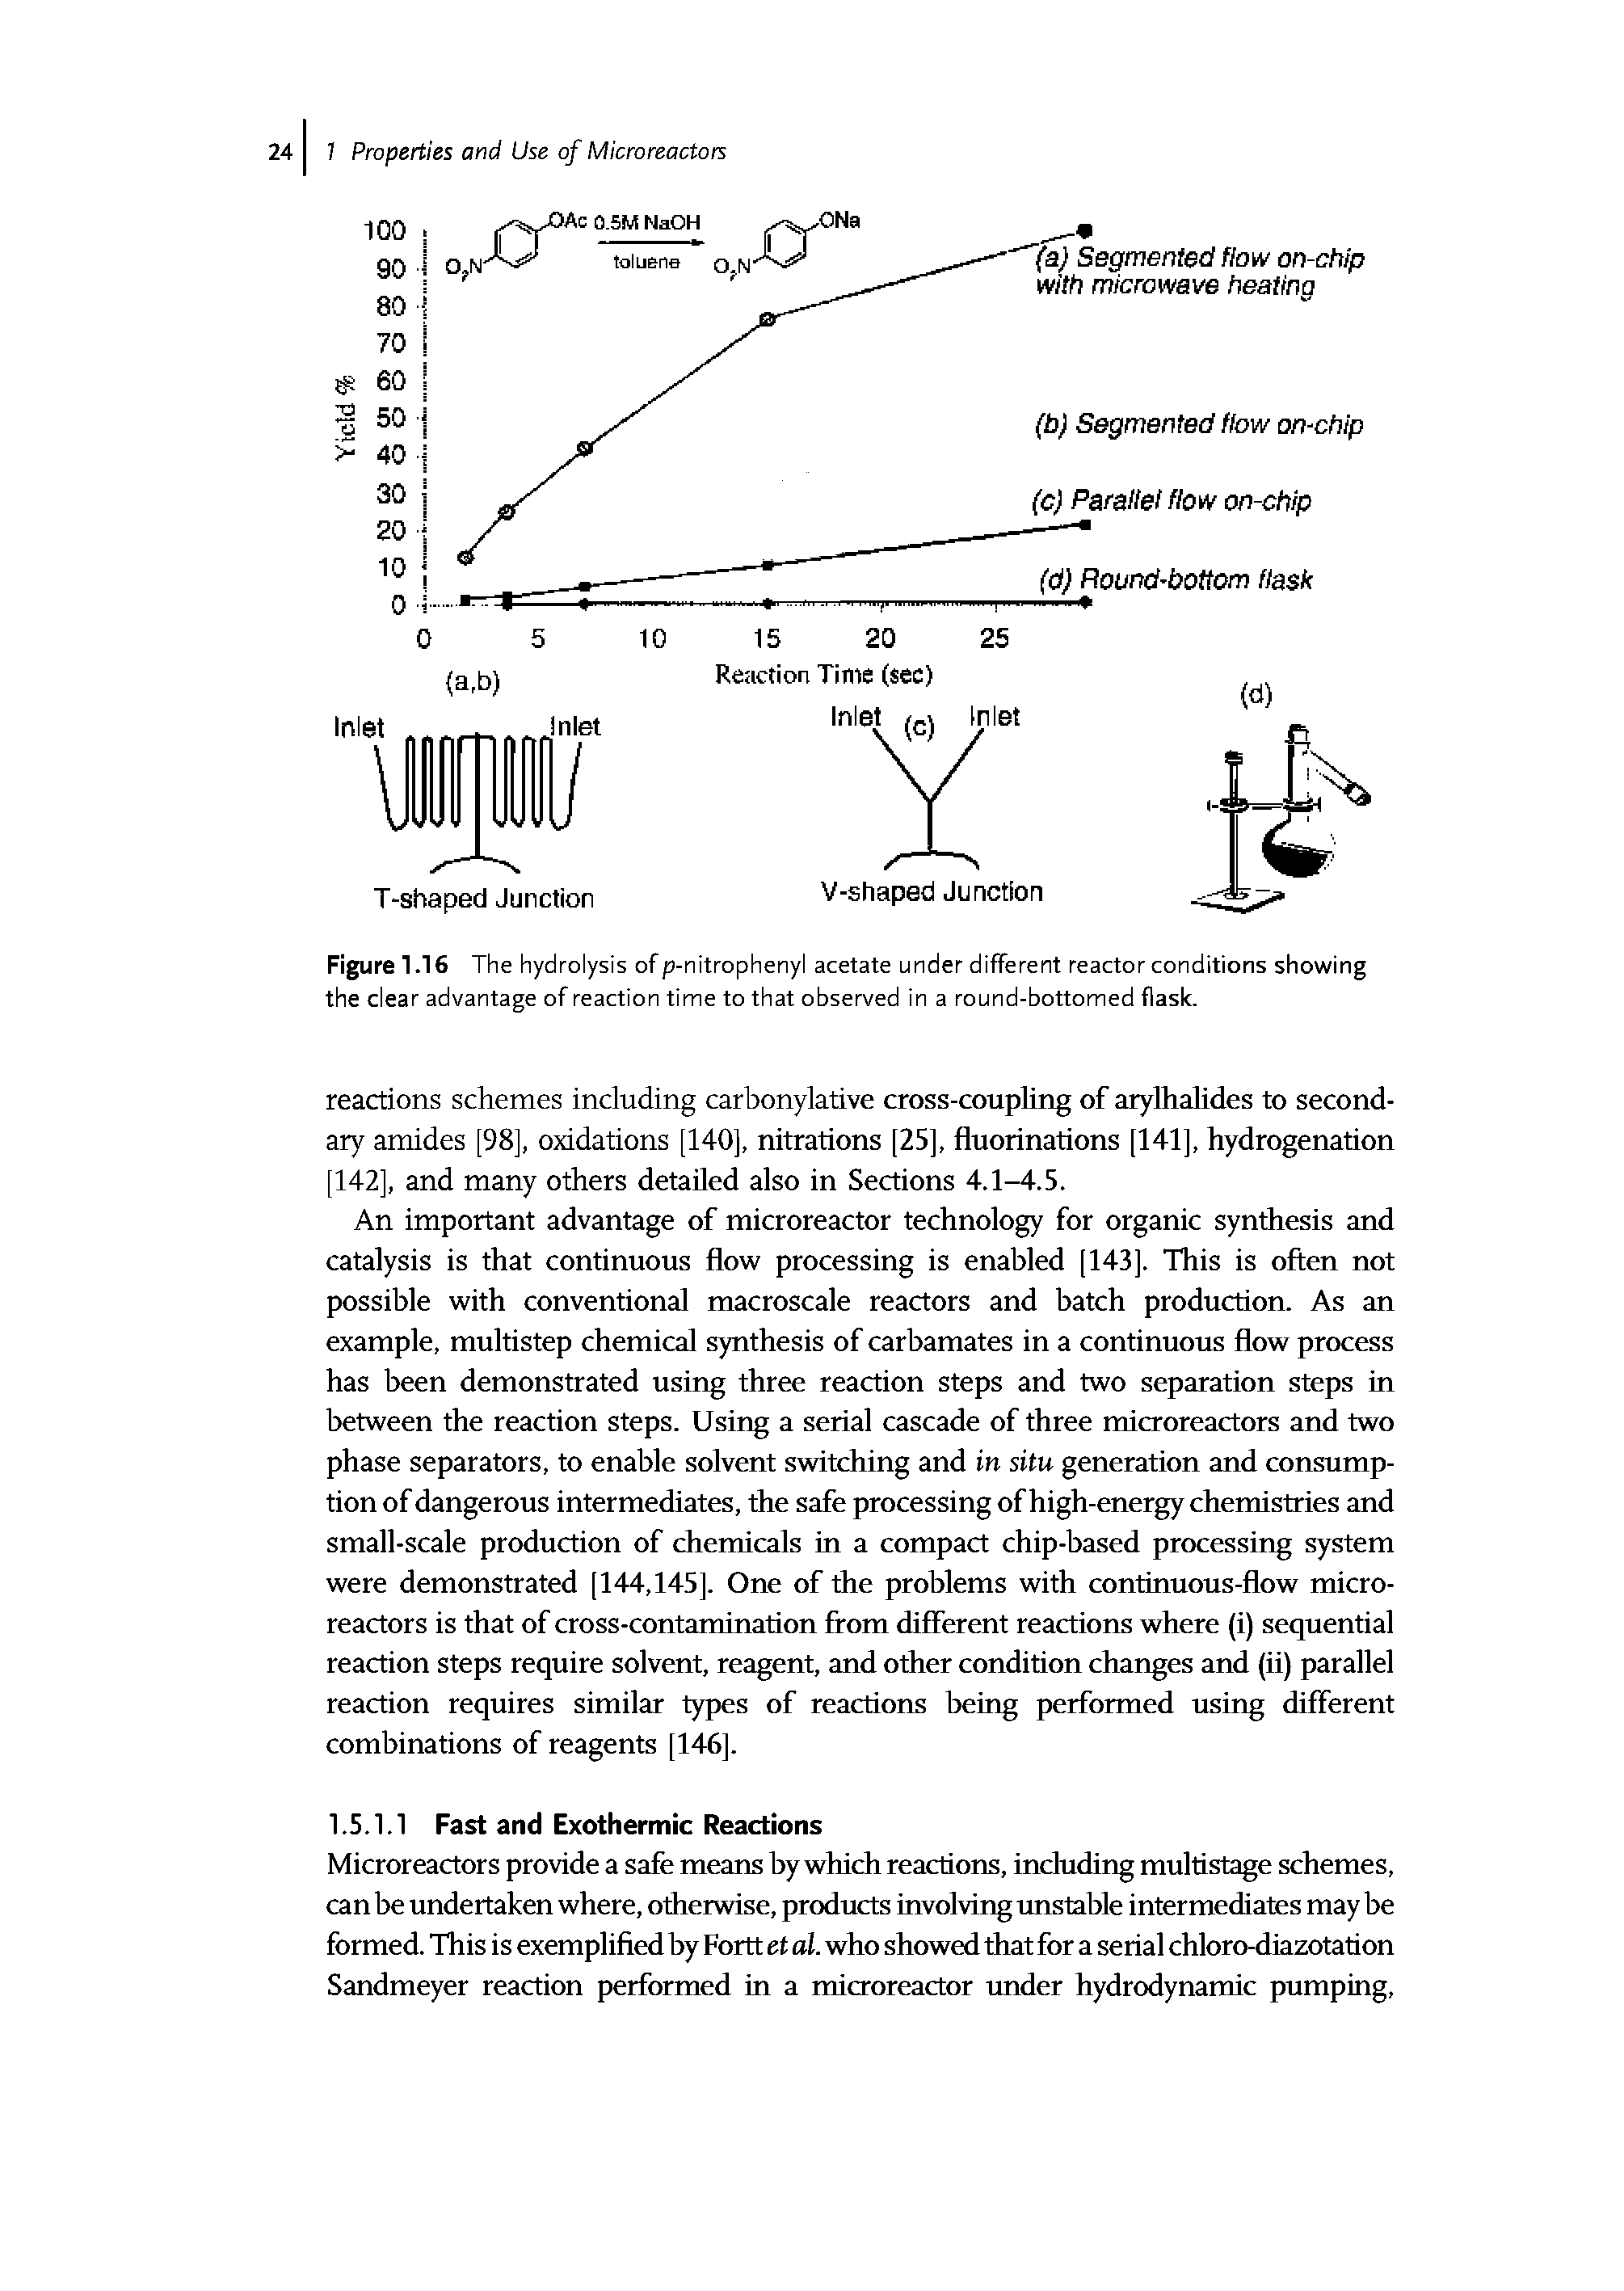 Figure 1.16 The hydrolysis of p-nitrophenyl acetate under different reactor conditions showing the clear advantage of reaction time to that observed in a round-bottomed flask.